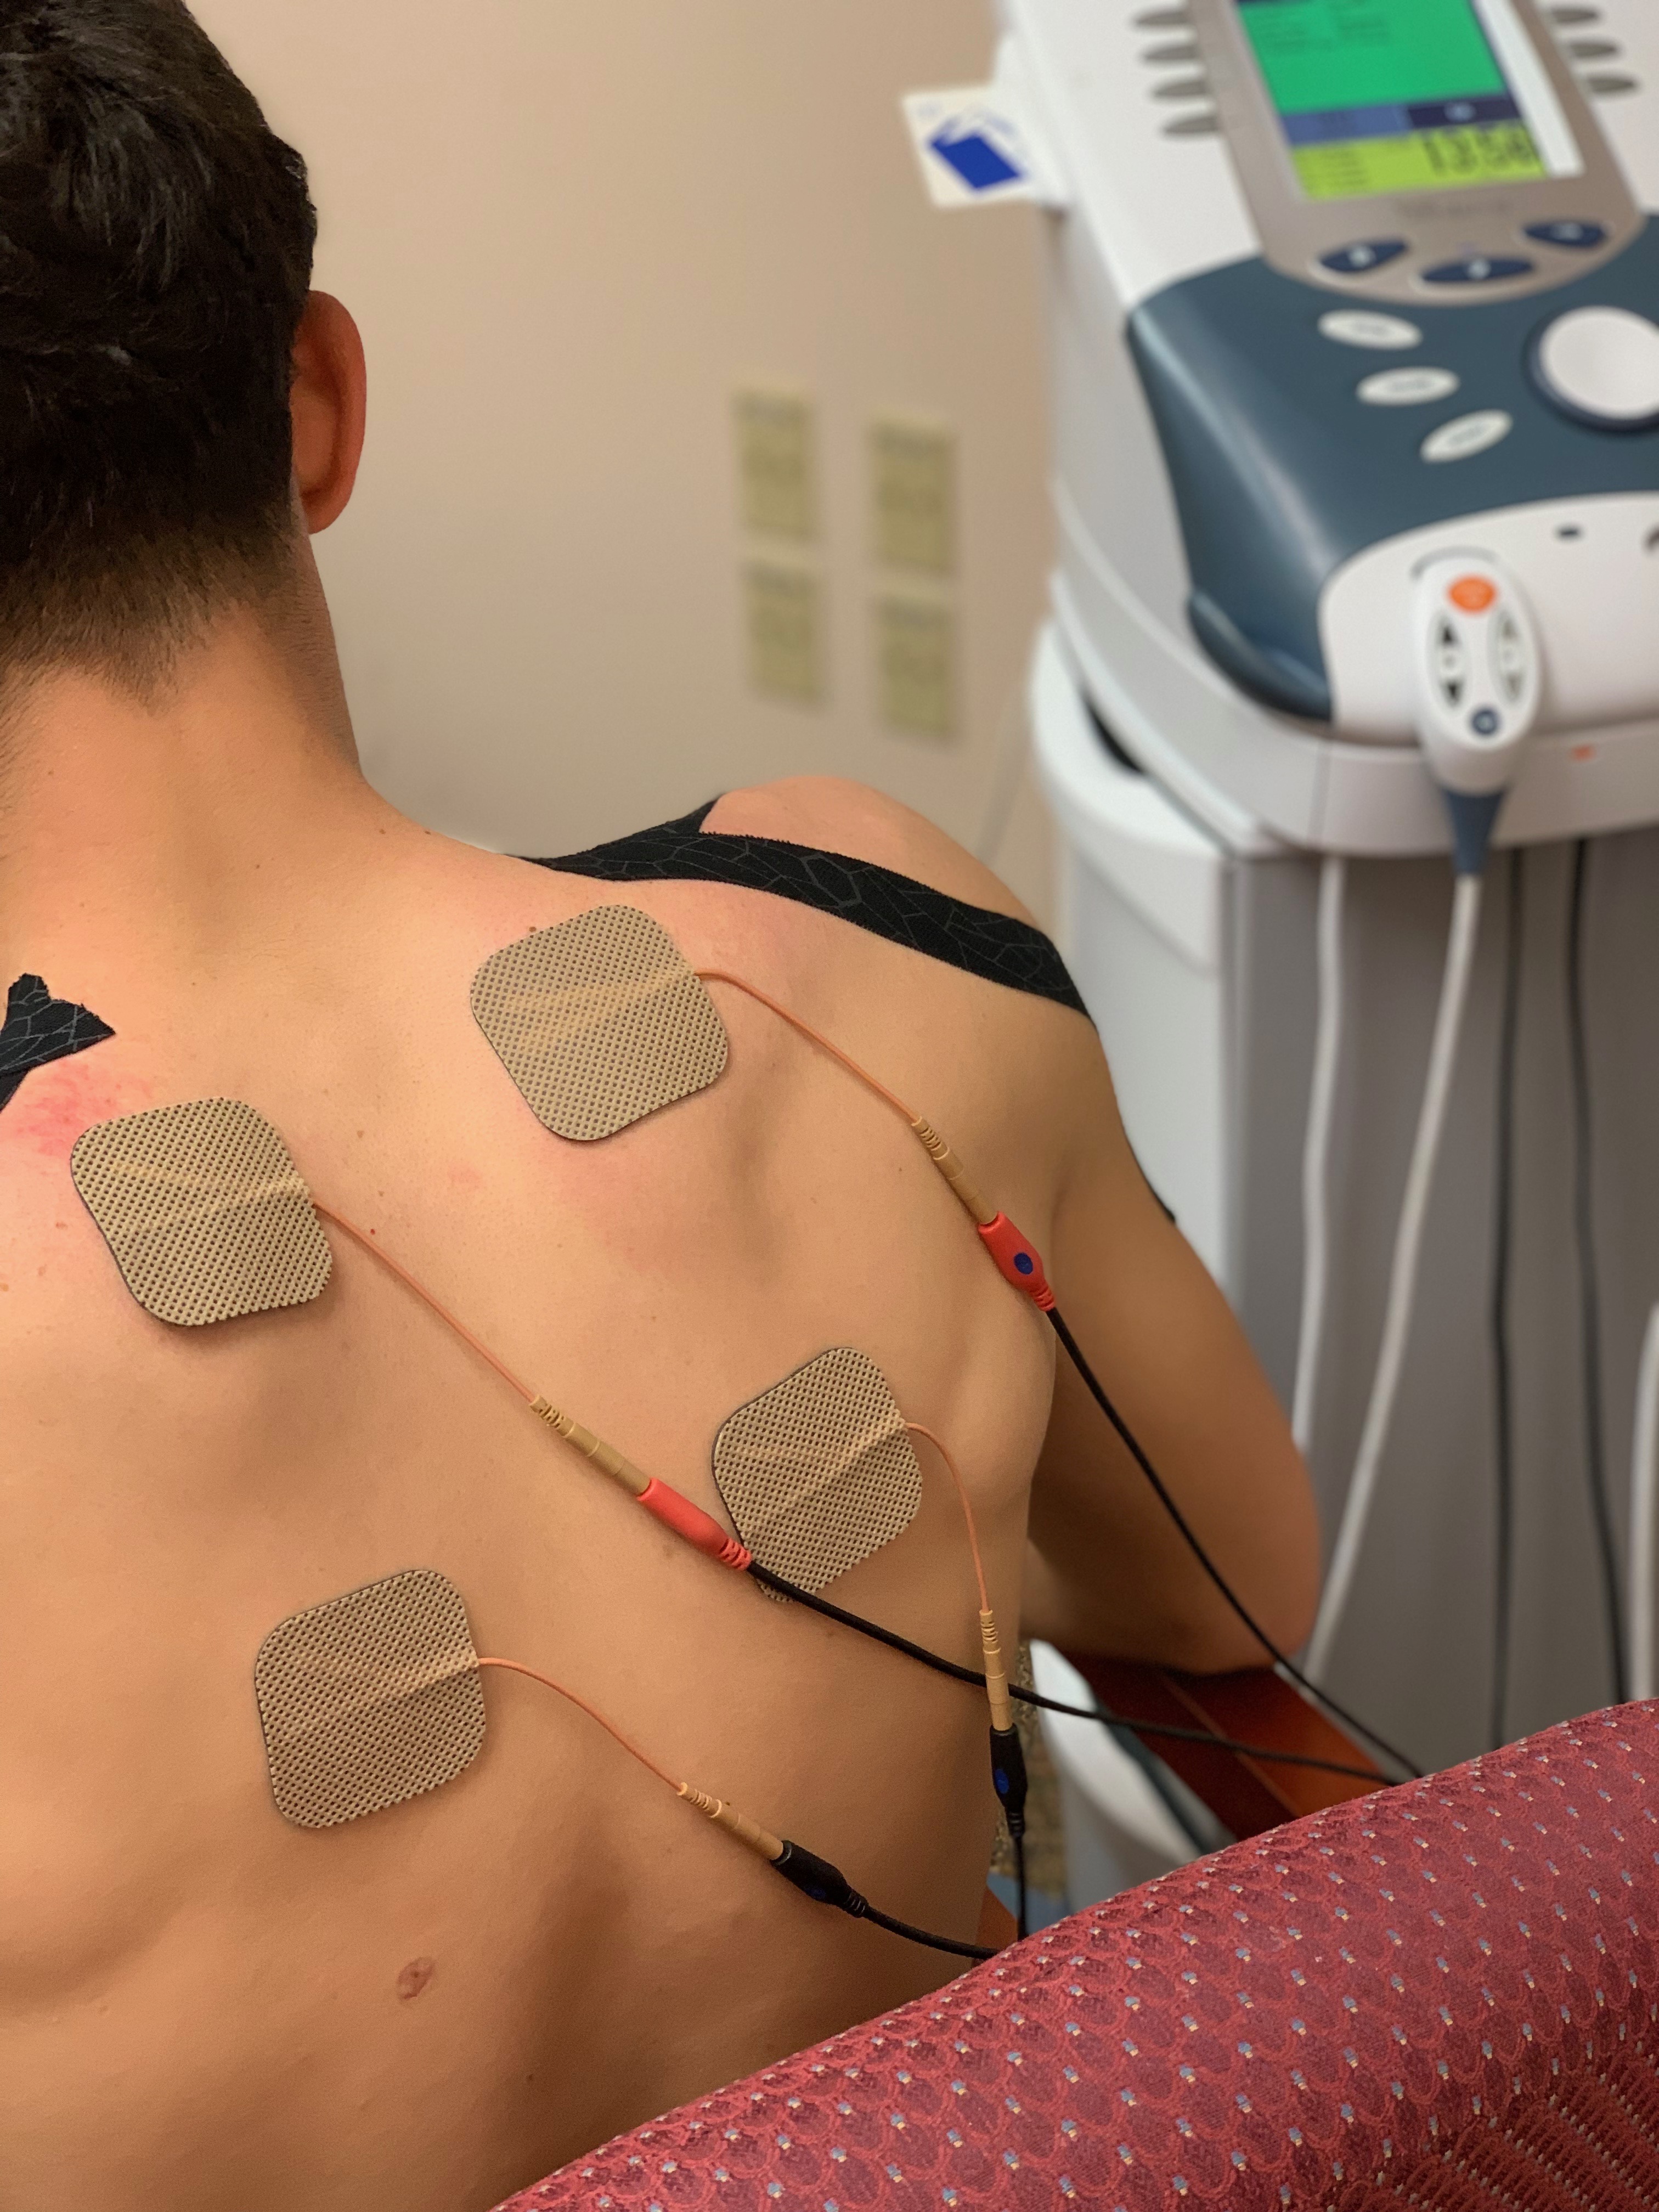 Electrical Stimulation - Healing Star Physical Therapy and Wellness